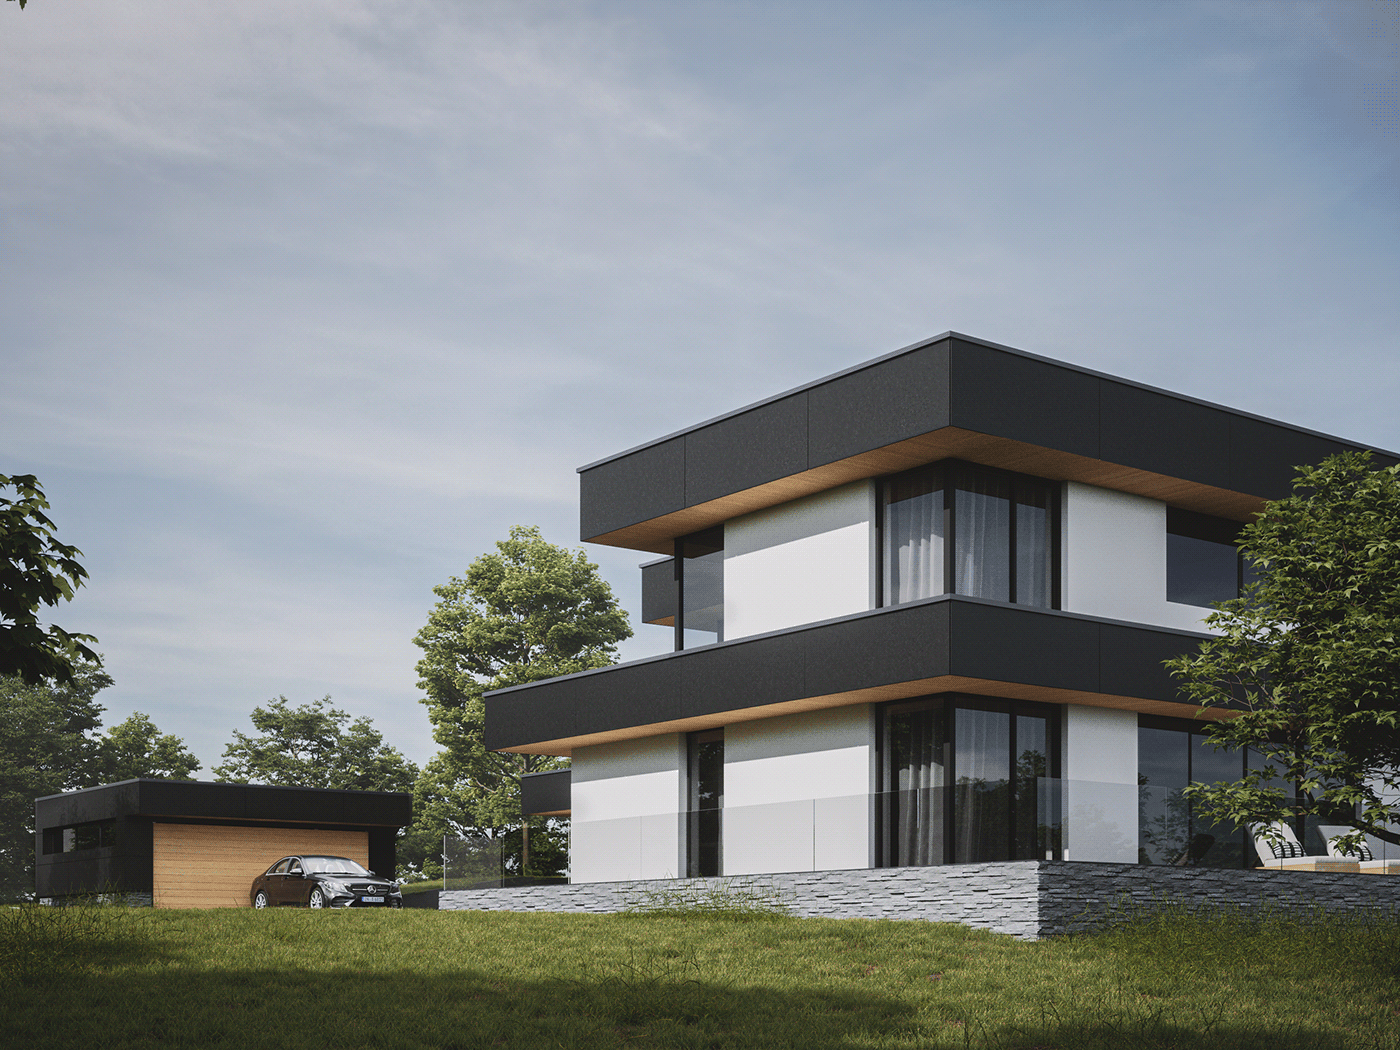 3ds max architecture ForestPack FStorm Render house modern private house Render Tree 